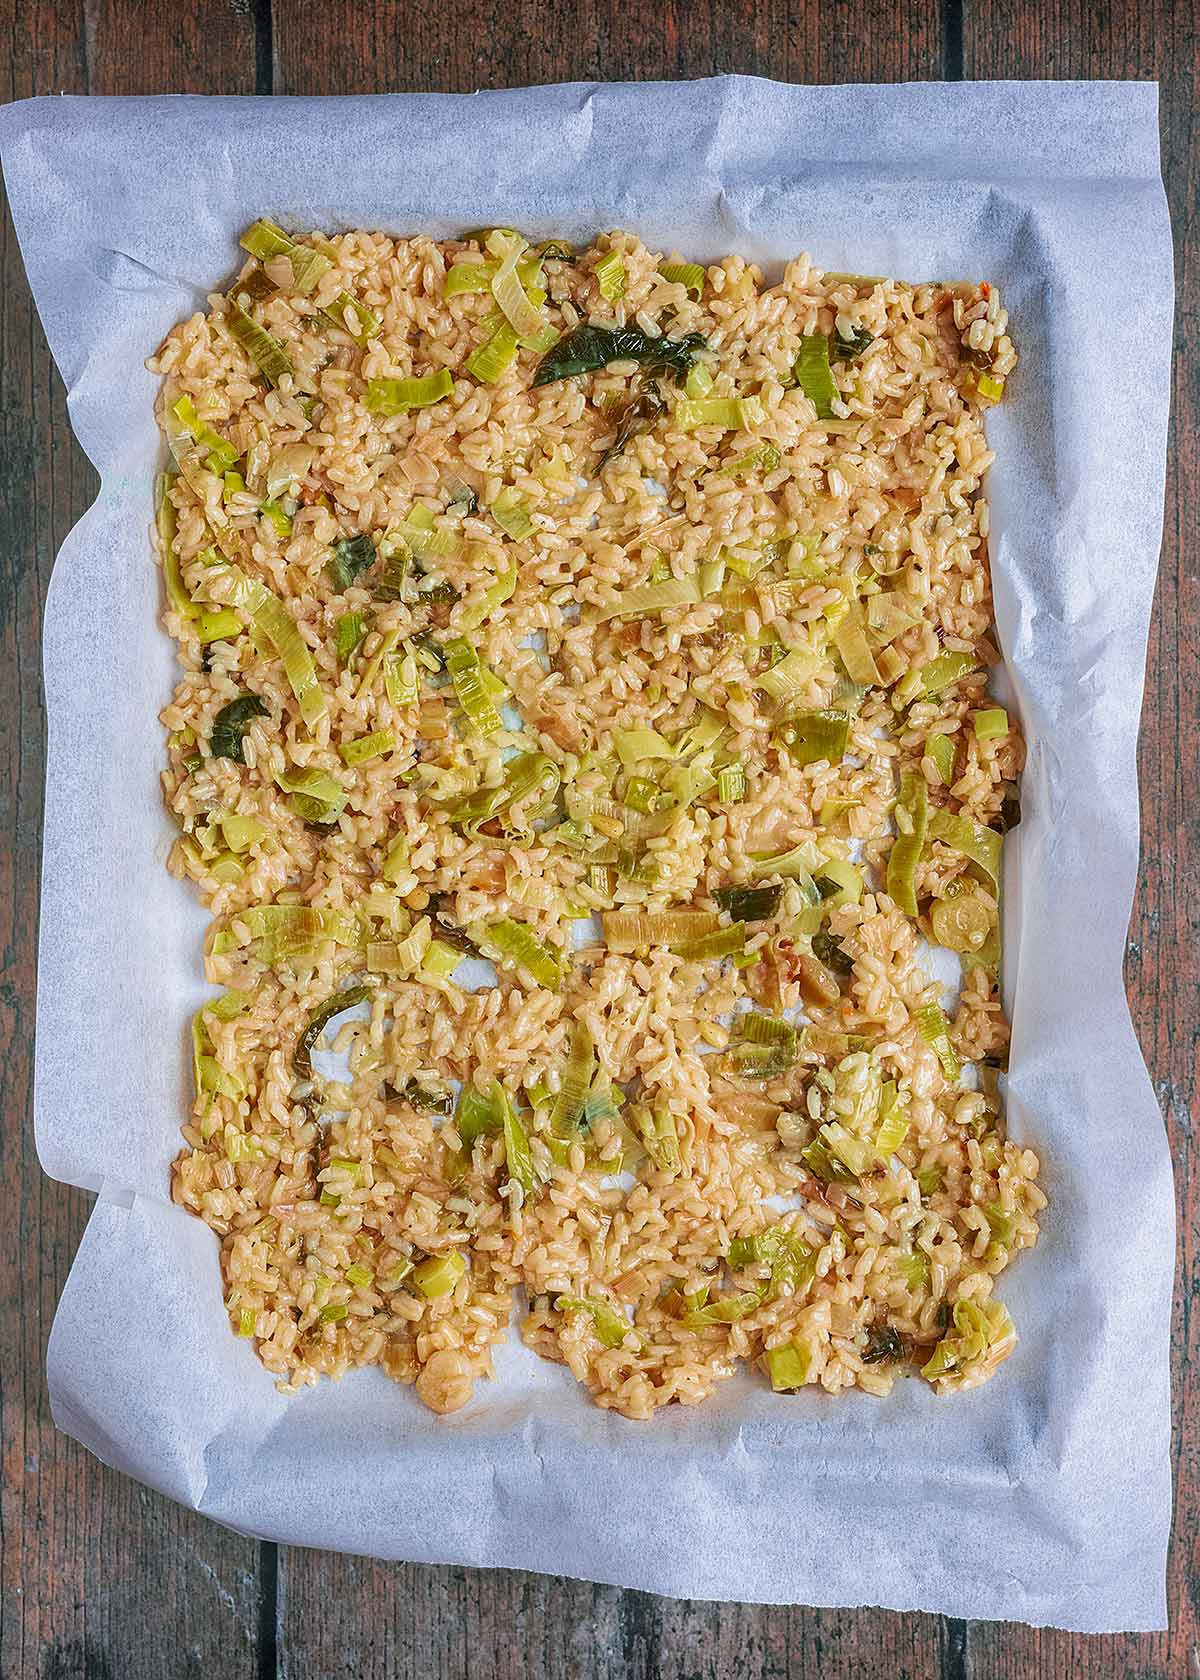 Risotto spread out over a lined baking sheet.